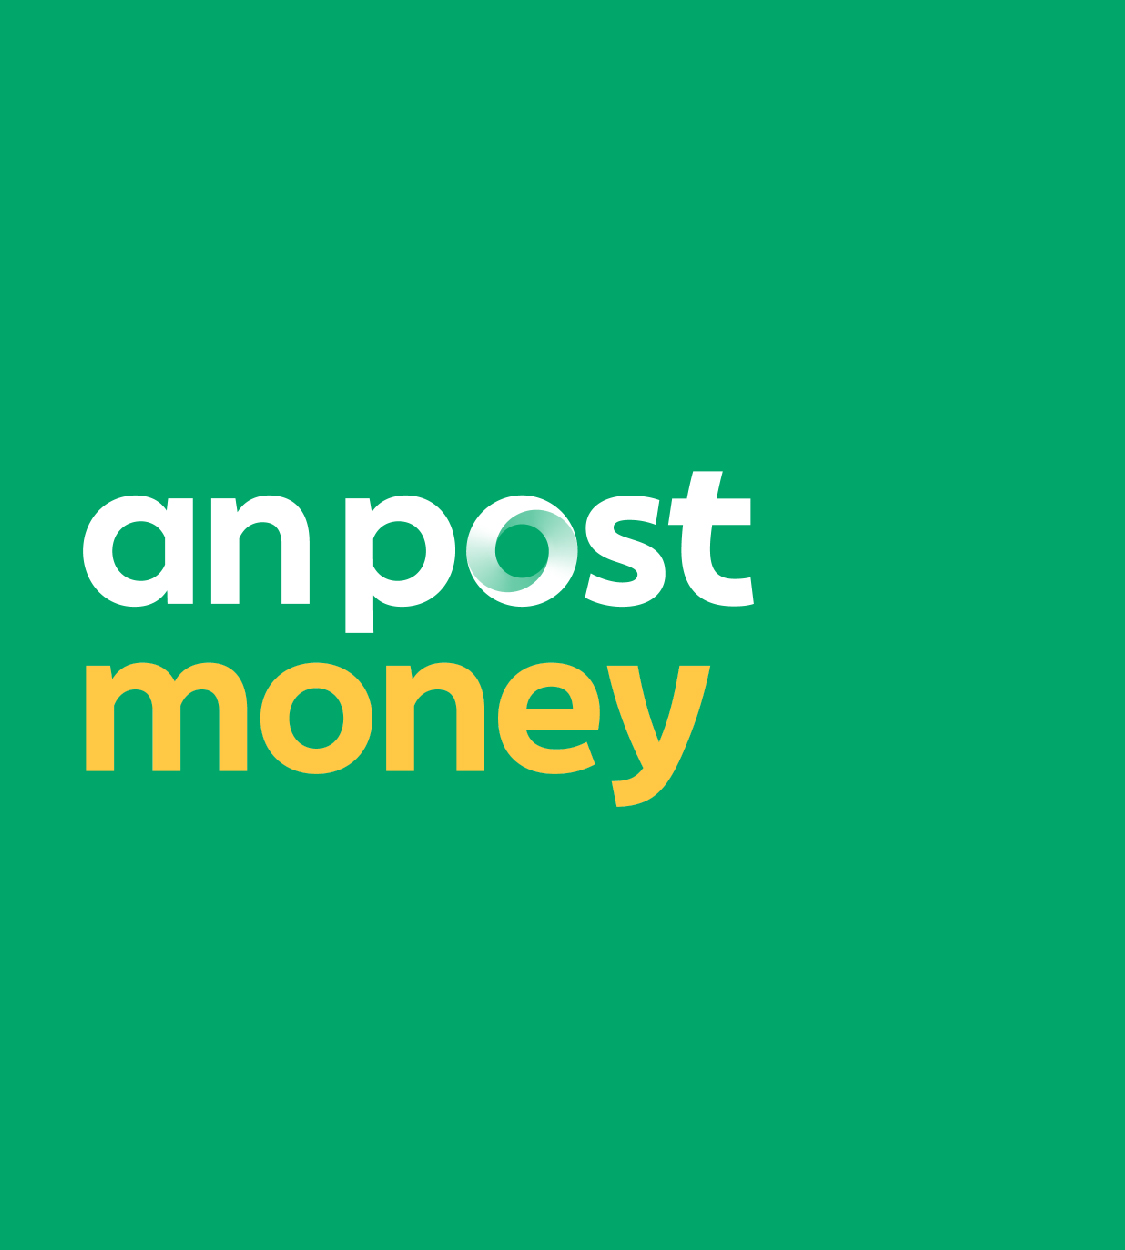 An post money logo on a green background